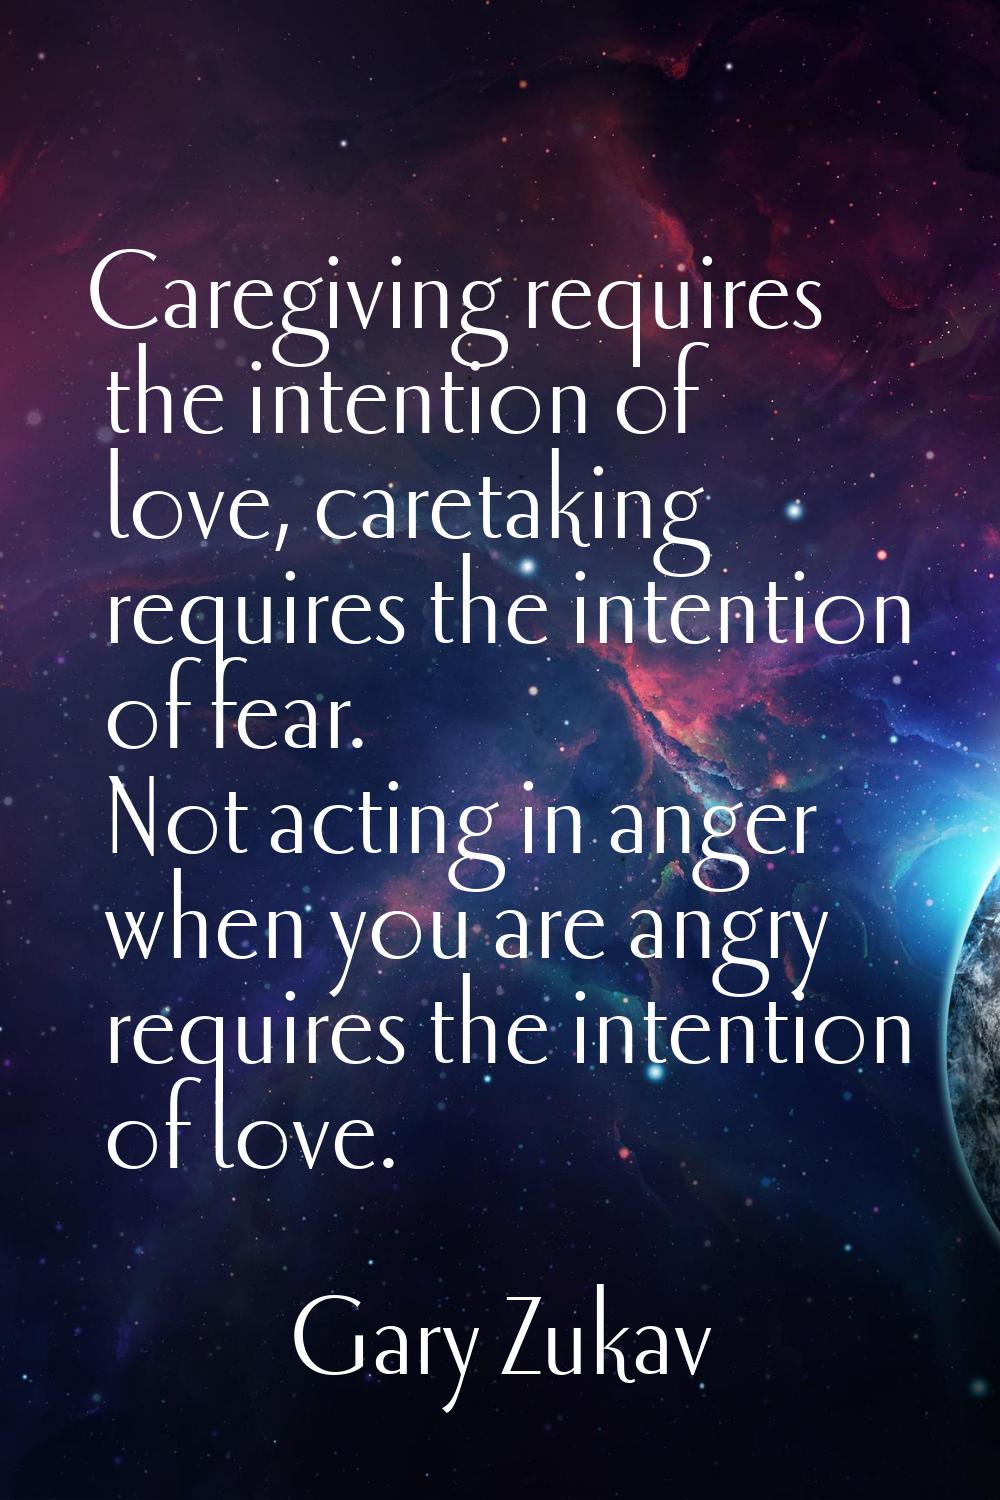 Caregiving requires the intention of love, caretaking requires the intention of fear. Not acting in